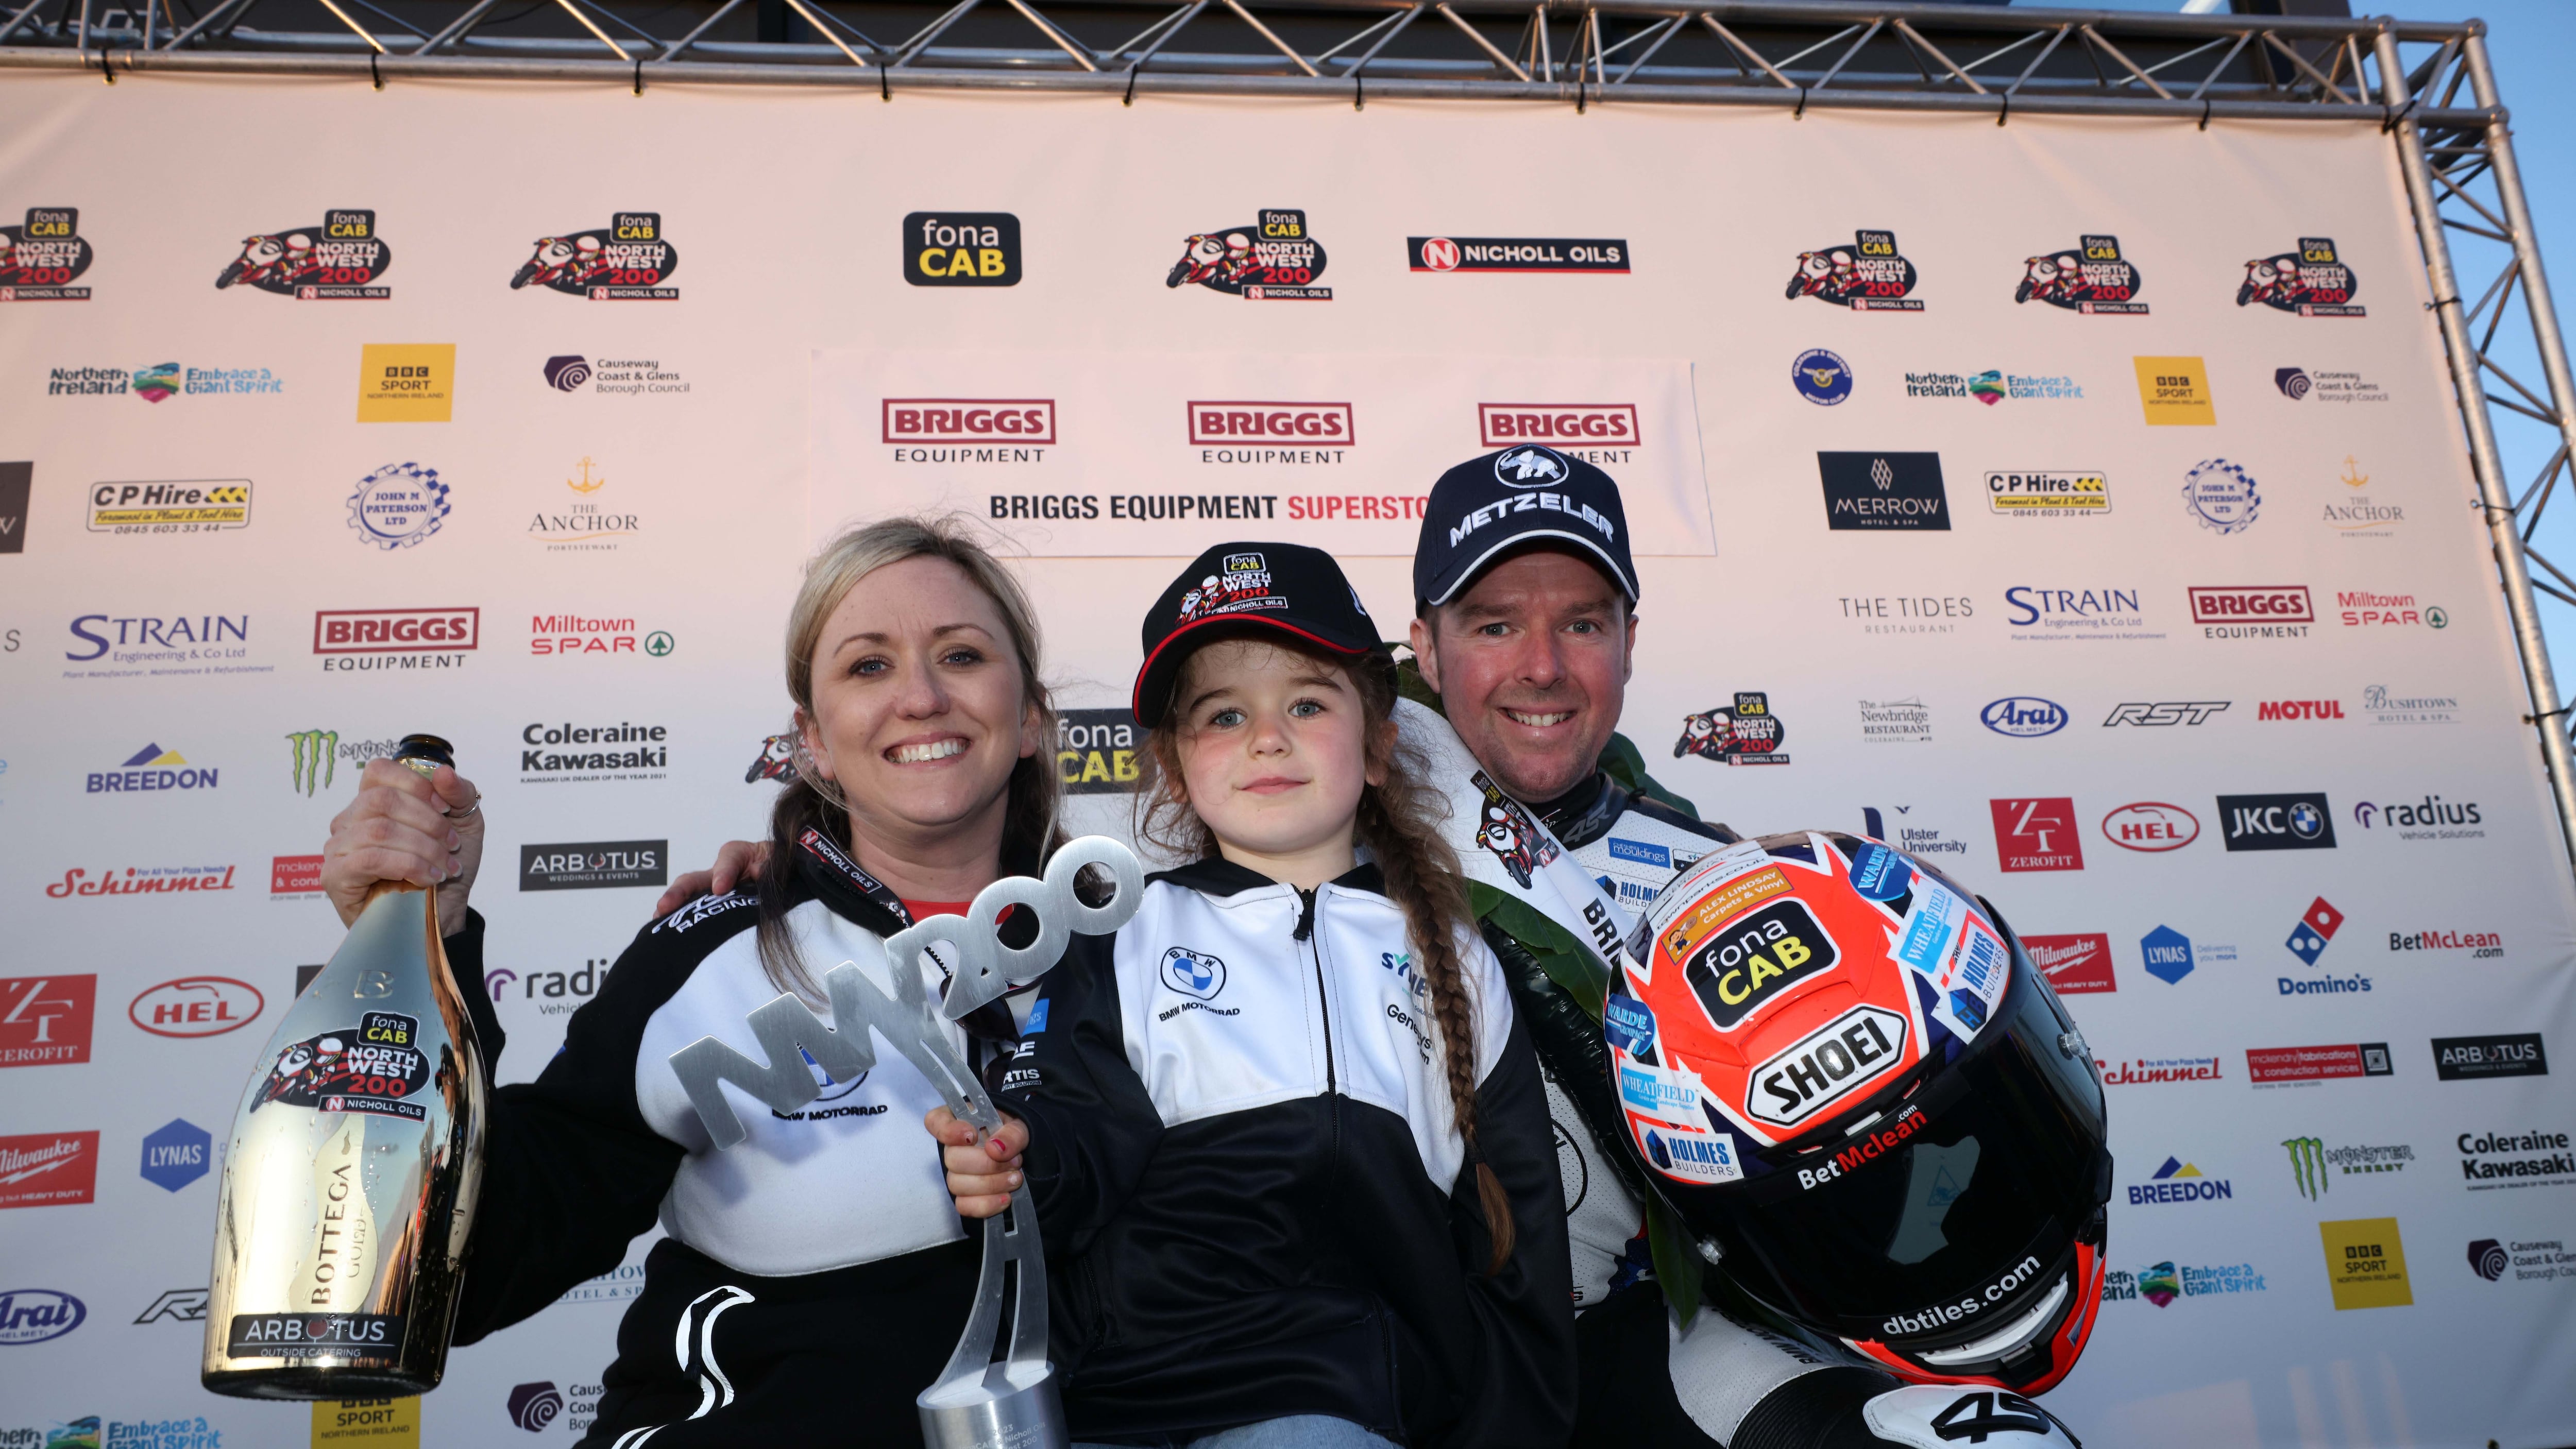 Alastair Seeley celebrates on the podium with his wife Danni and daughter Olivia after victory in the Briggs Equipment Superstock race at the NW200 on Thursday evening